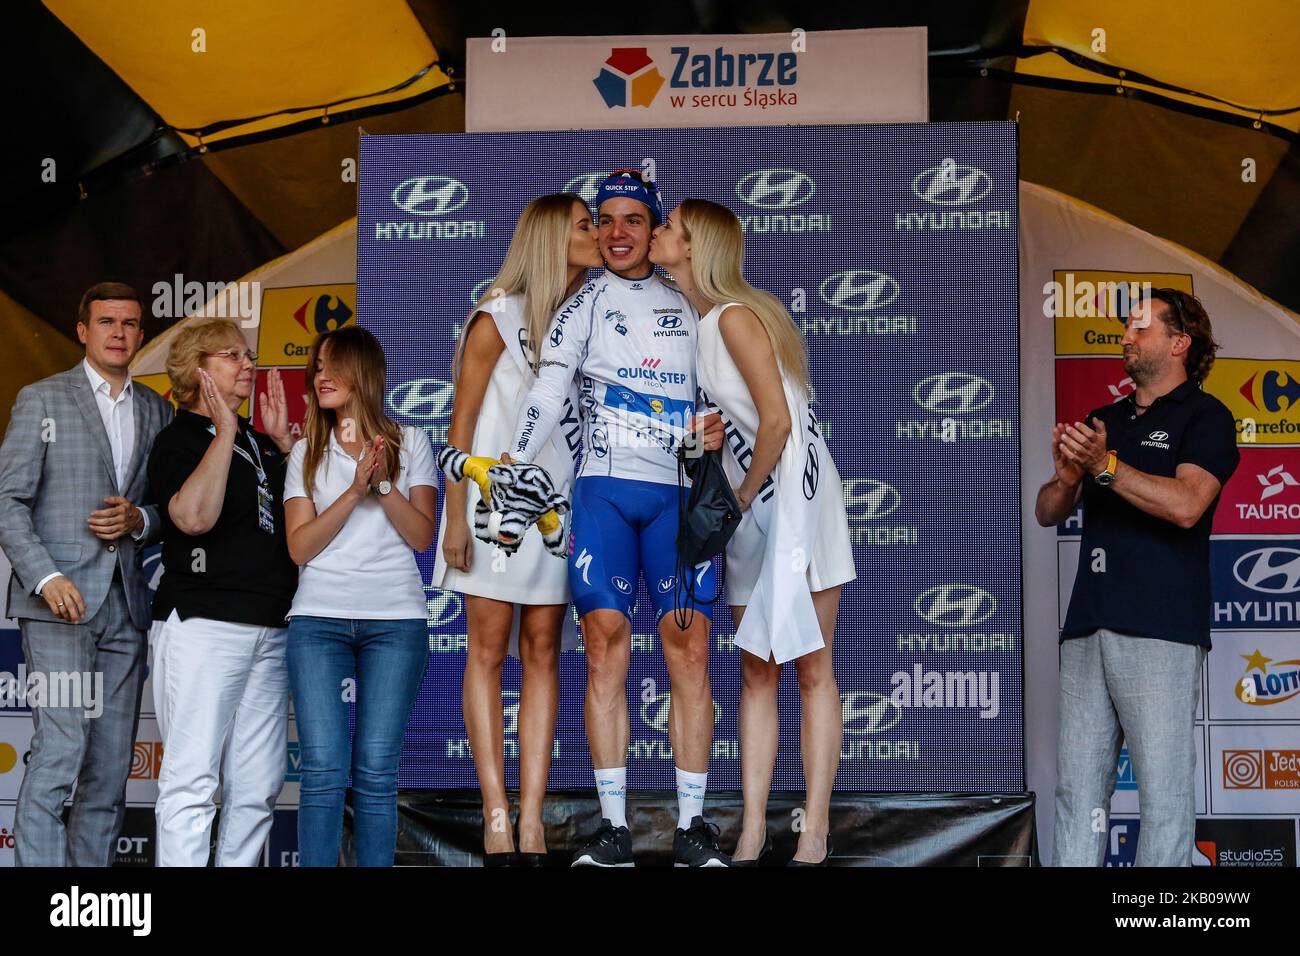 Alvaro Jose HODEG CHAGUI receives special Hyundai award as best sprinter during the decoration ceremony after winning third stage of 75th Tour de Pologne, UCI World Tour in Zabrze, Poland on August 6, 2018. (Photo by Dominika Zarzycka/NurPhoto) Stock Photo